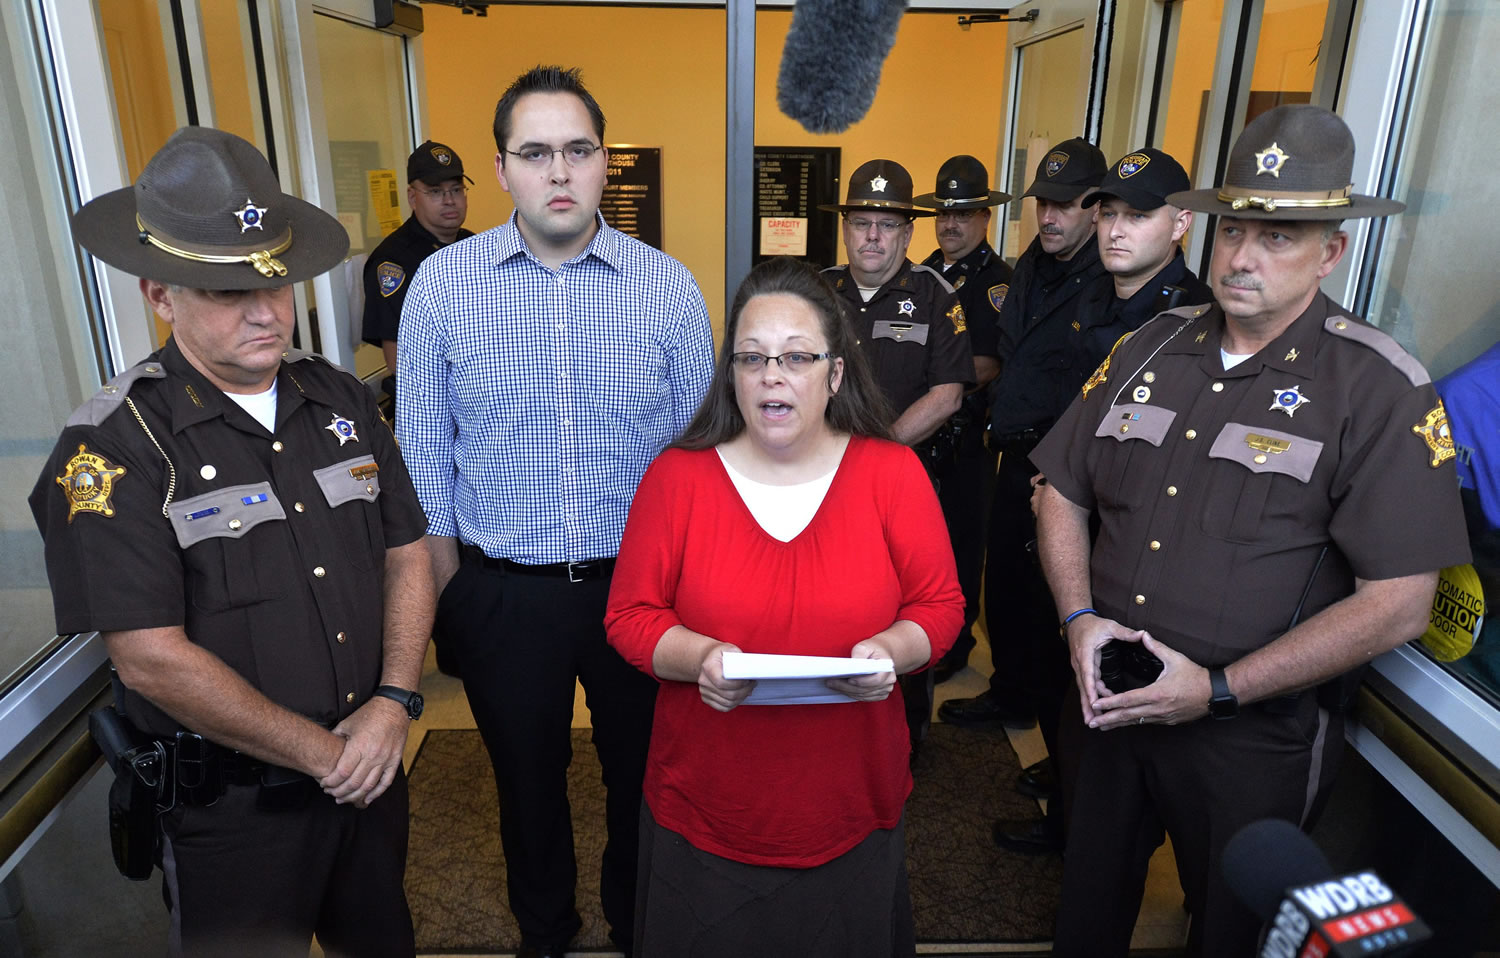 Surrounded by Rowan County Sheriff's deputies, Rowan County Clerk Kim Davis, center, with her son Nathan Davis standing by her side, makes a statement to the media at the front door of the Rowan County Judicial Center in Morehead, Ky., on Monday. Davis announced that her office will issue marriage licenses under order of a federal judge, but they will not have her name or office listed. (AP Photo/Timothy D.